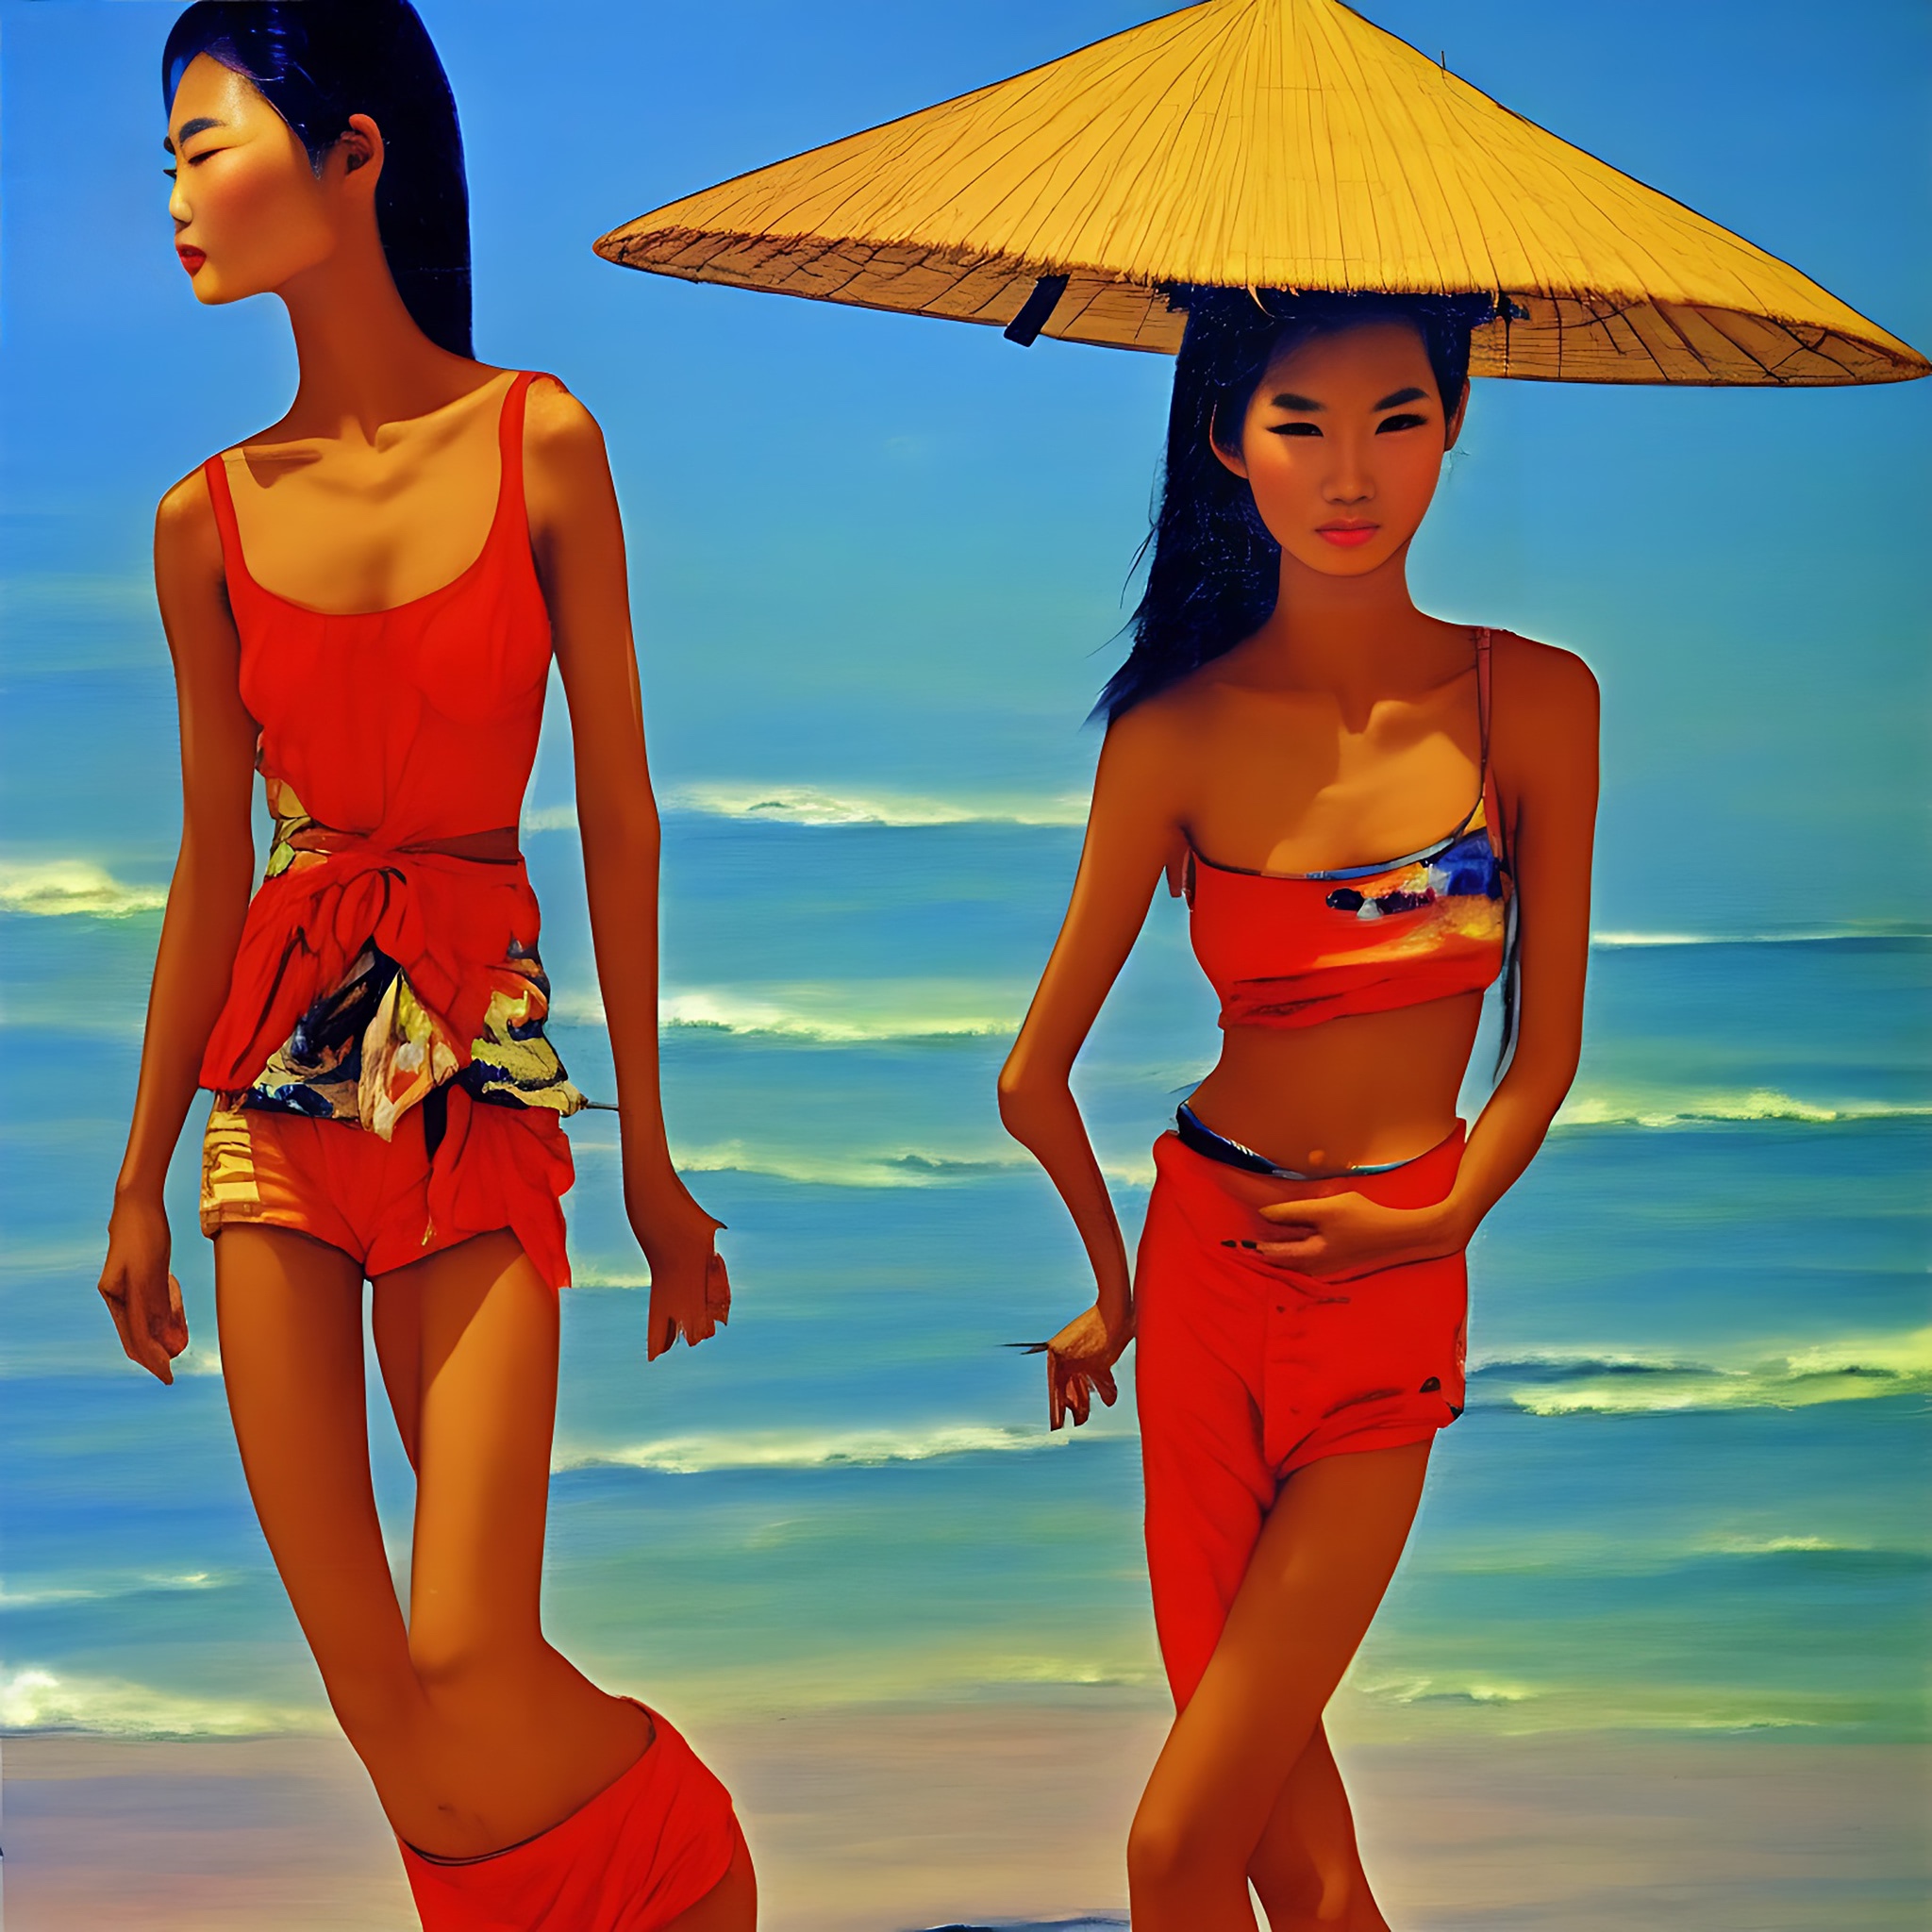 vietnamese-model-on-a-beach-in-asia-in-the-1980s-painting